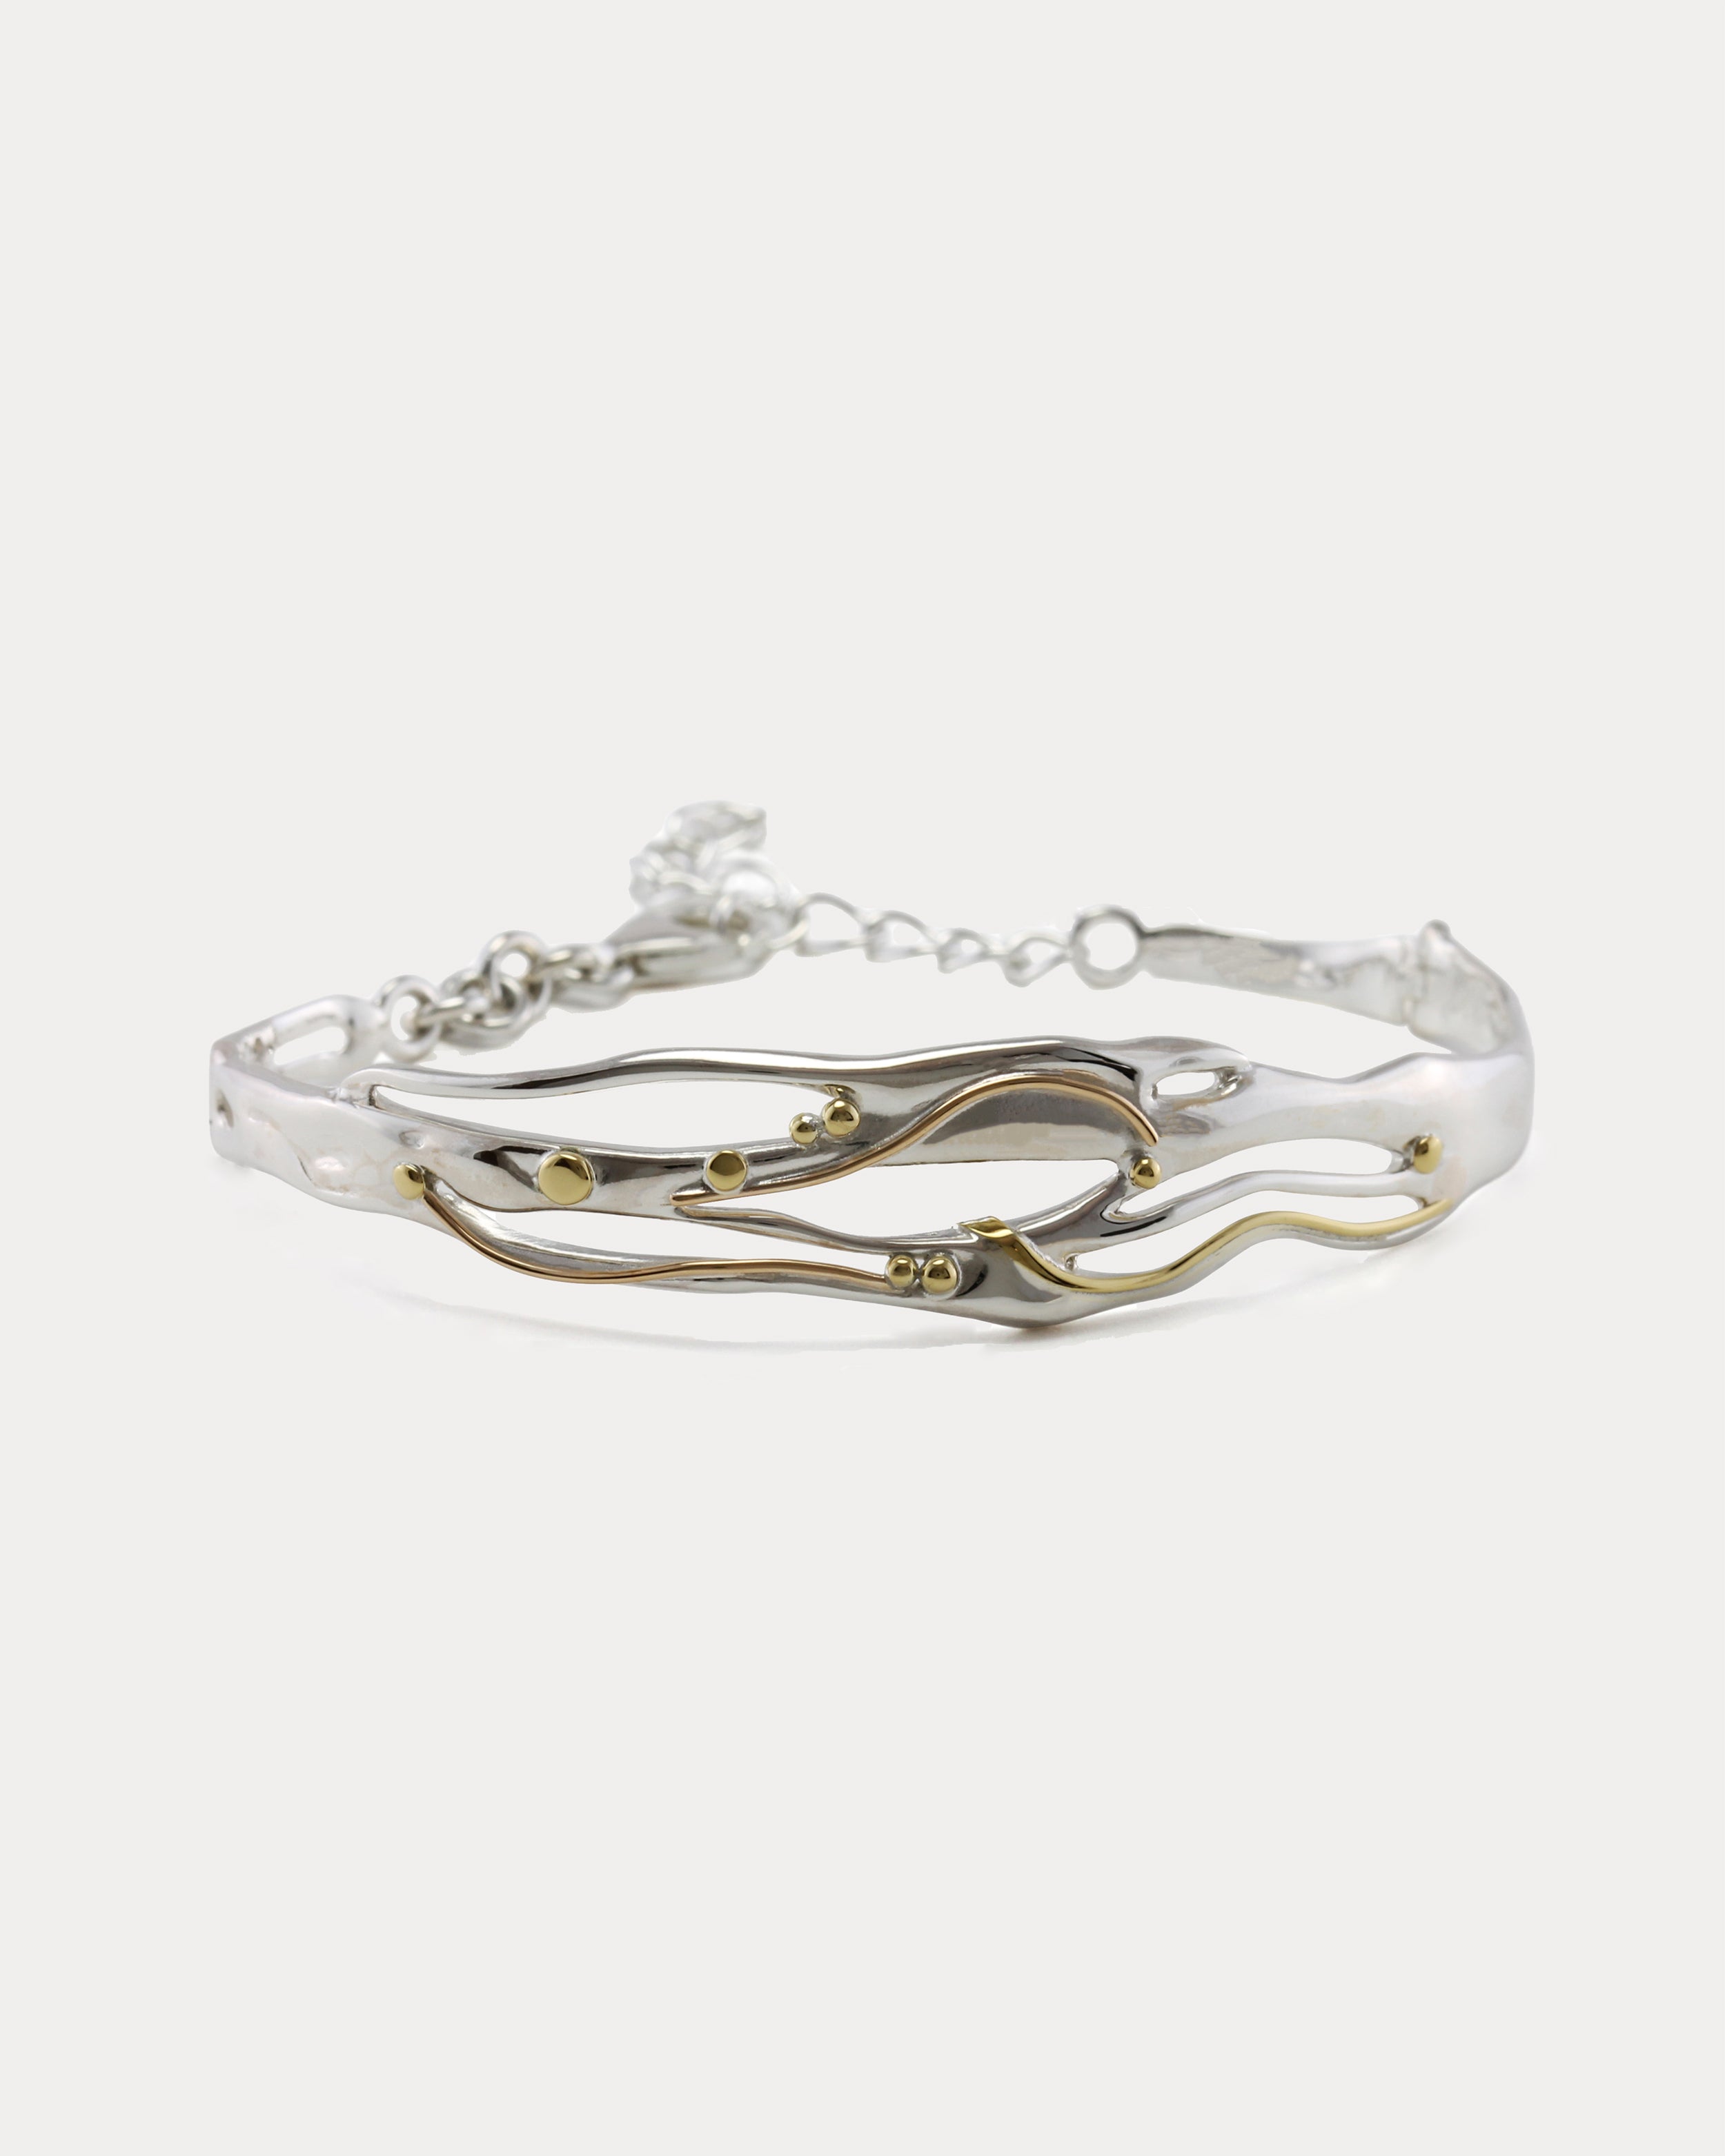 Mixed Metal Bracelet with a flowing design of sterling silver and 14kt gold with brass pip details.